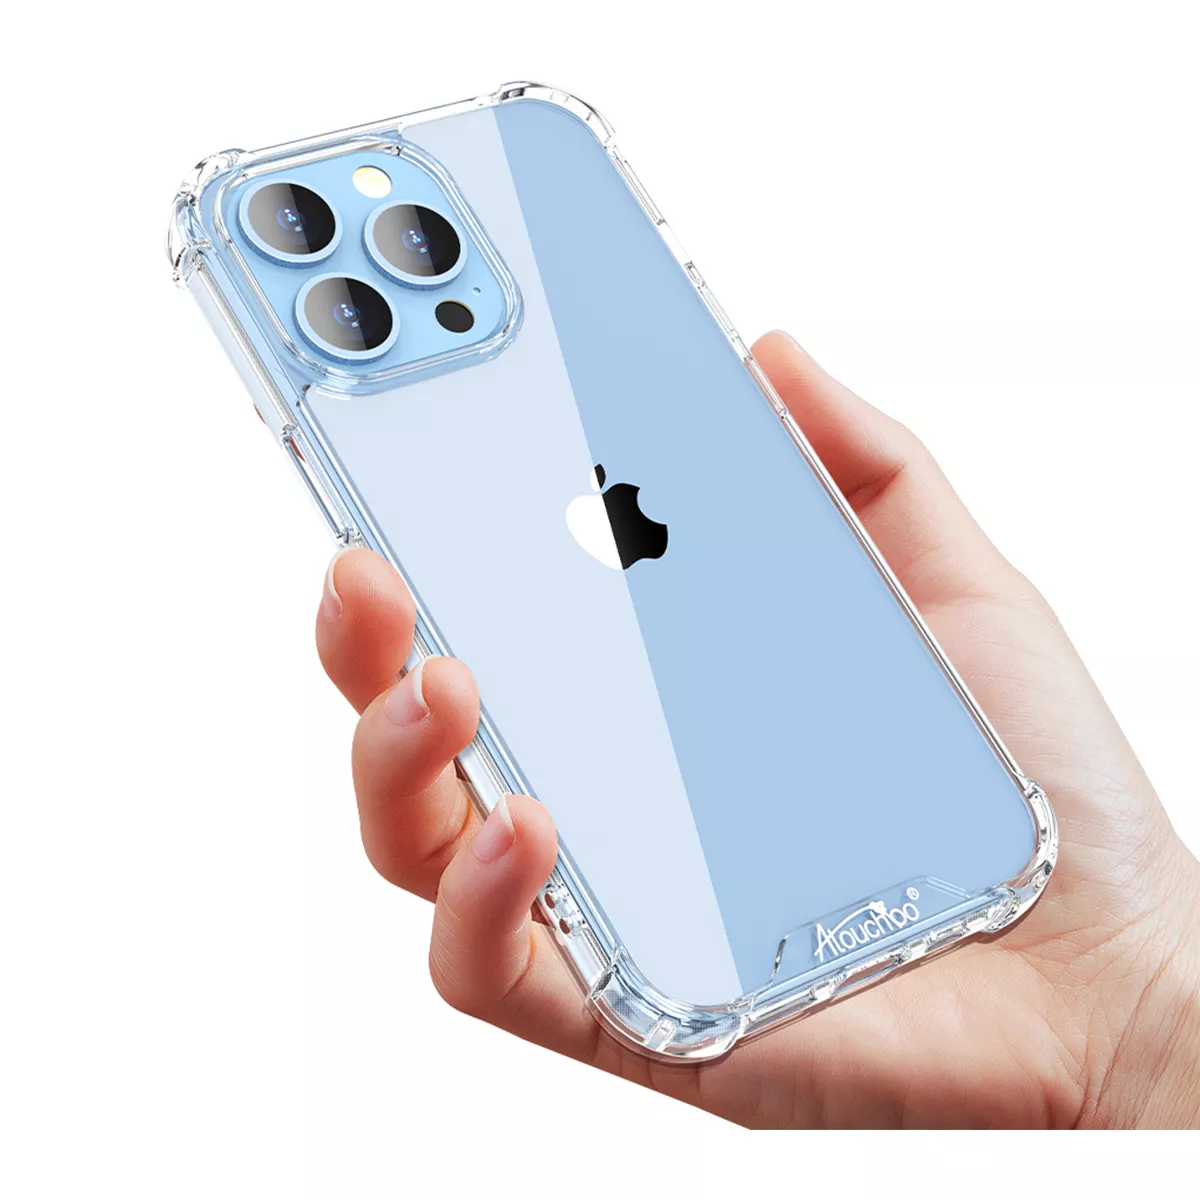 King Kong Armor Anti-Burst Case IPhone X. -  -  Wholesale Cell Phone Covers, Accessories and Repair Parts - Free Shipping